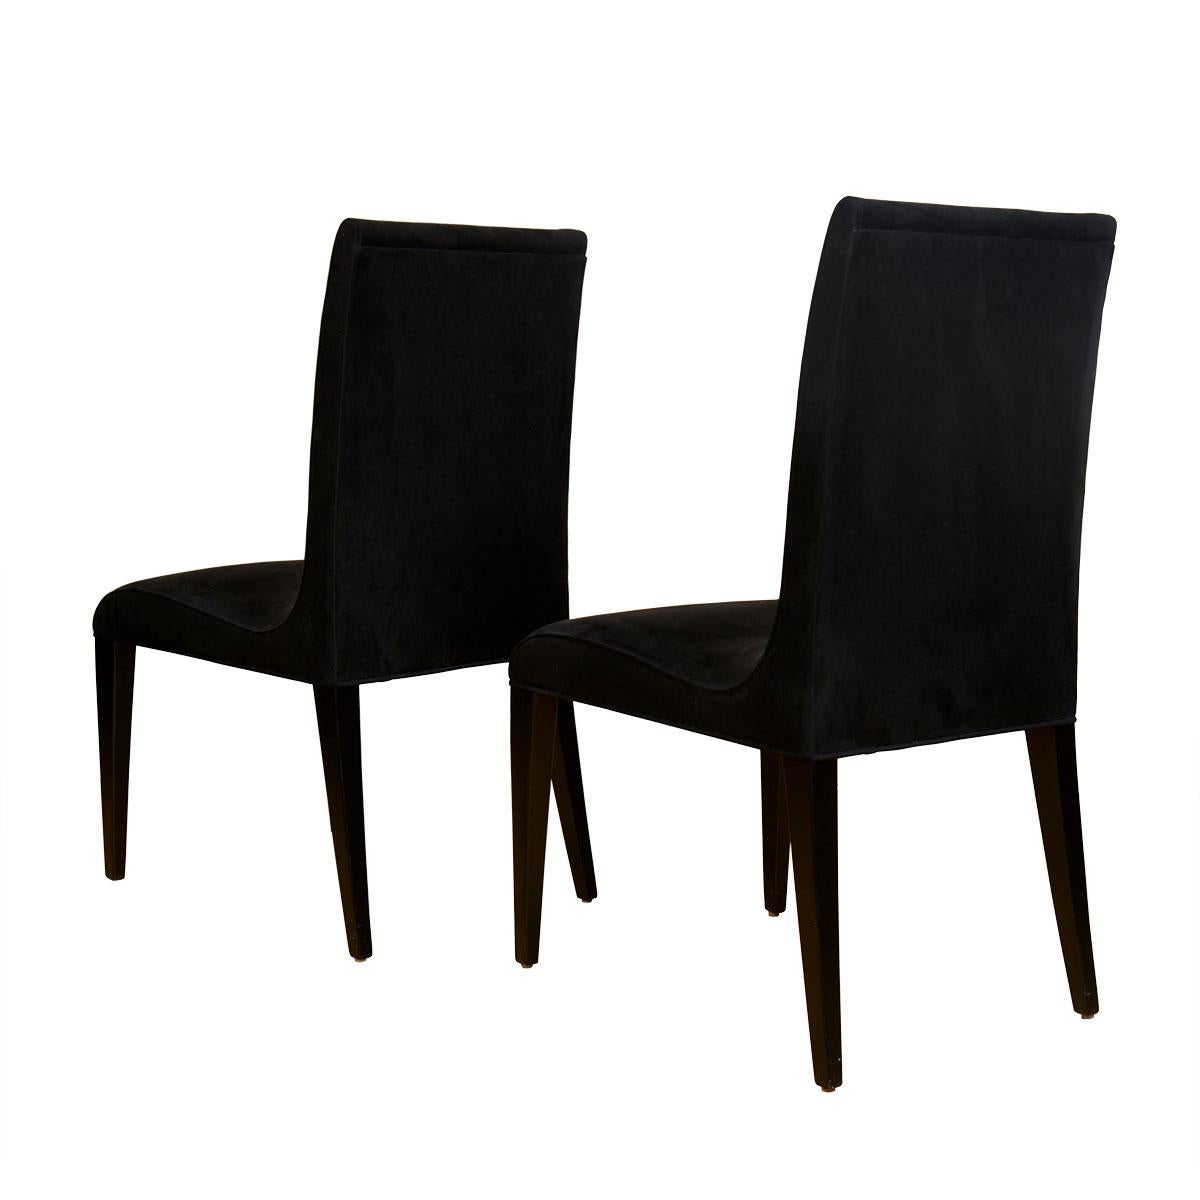 Set of 6 Contemporary Dining Chairs from Theodore’s Upholstered in Ultra Suede In Excellent Condition For Sale In Kensington, MD